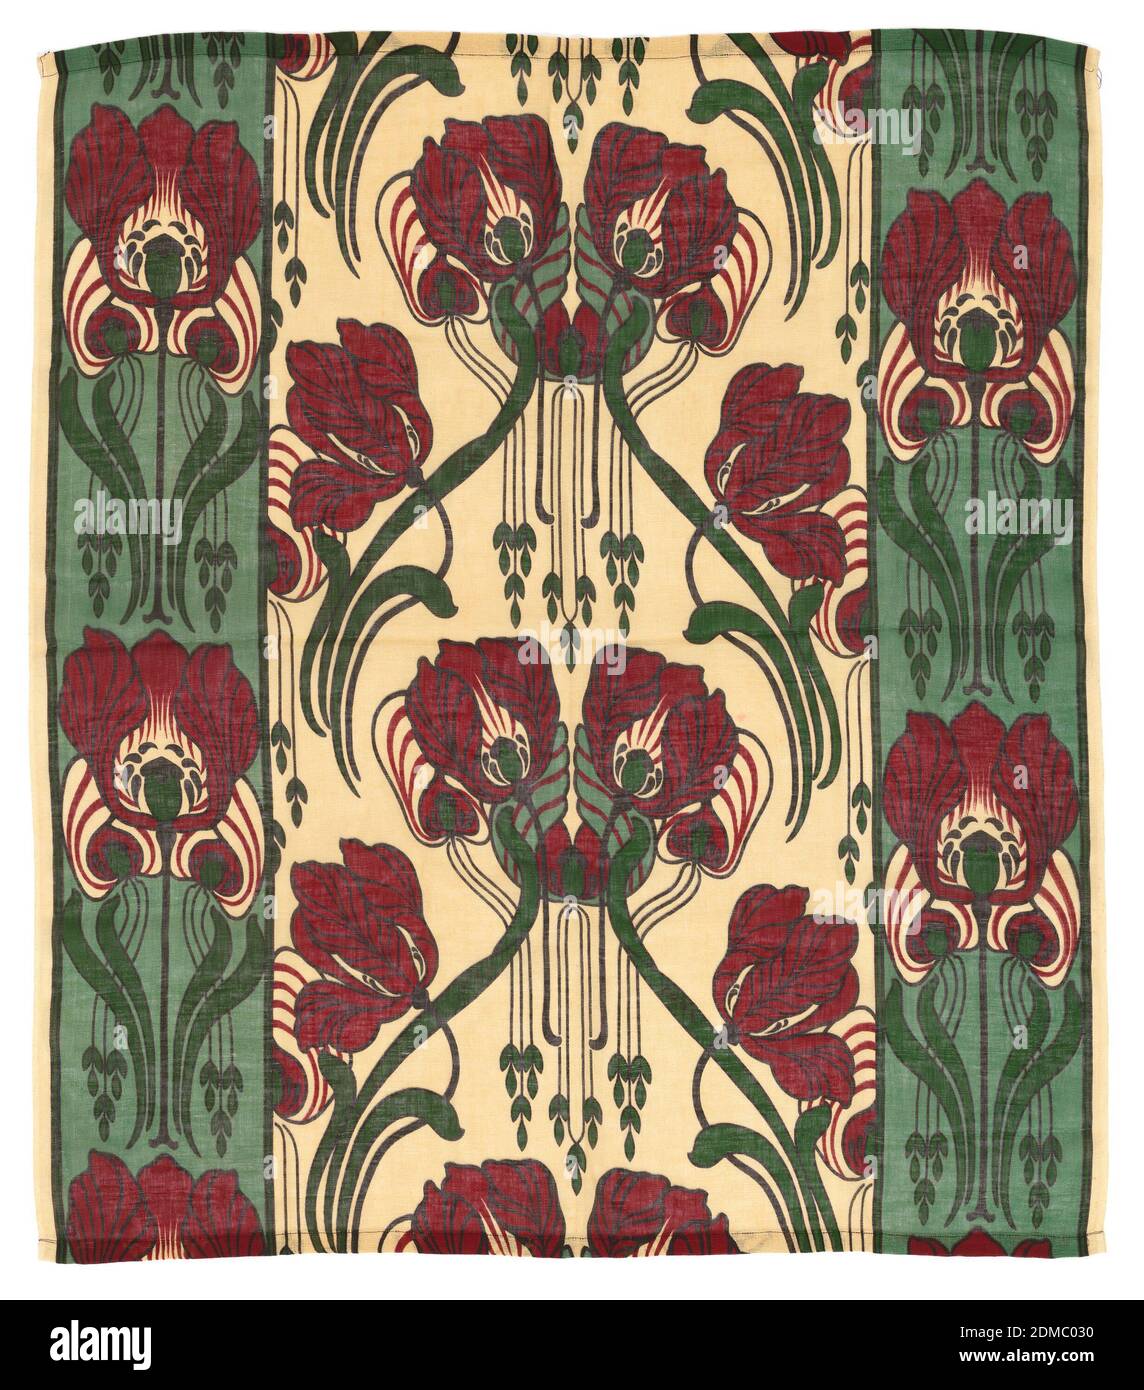 Textile, Medium: cotton Technique: printed on plain weave, Lightweight scrim-style curtain fabric printed with a dark red and light and dark green iris pattern,, USA, ca. 1900, printed, dyed & painted textiles, Textile Stock Photo